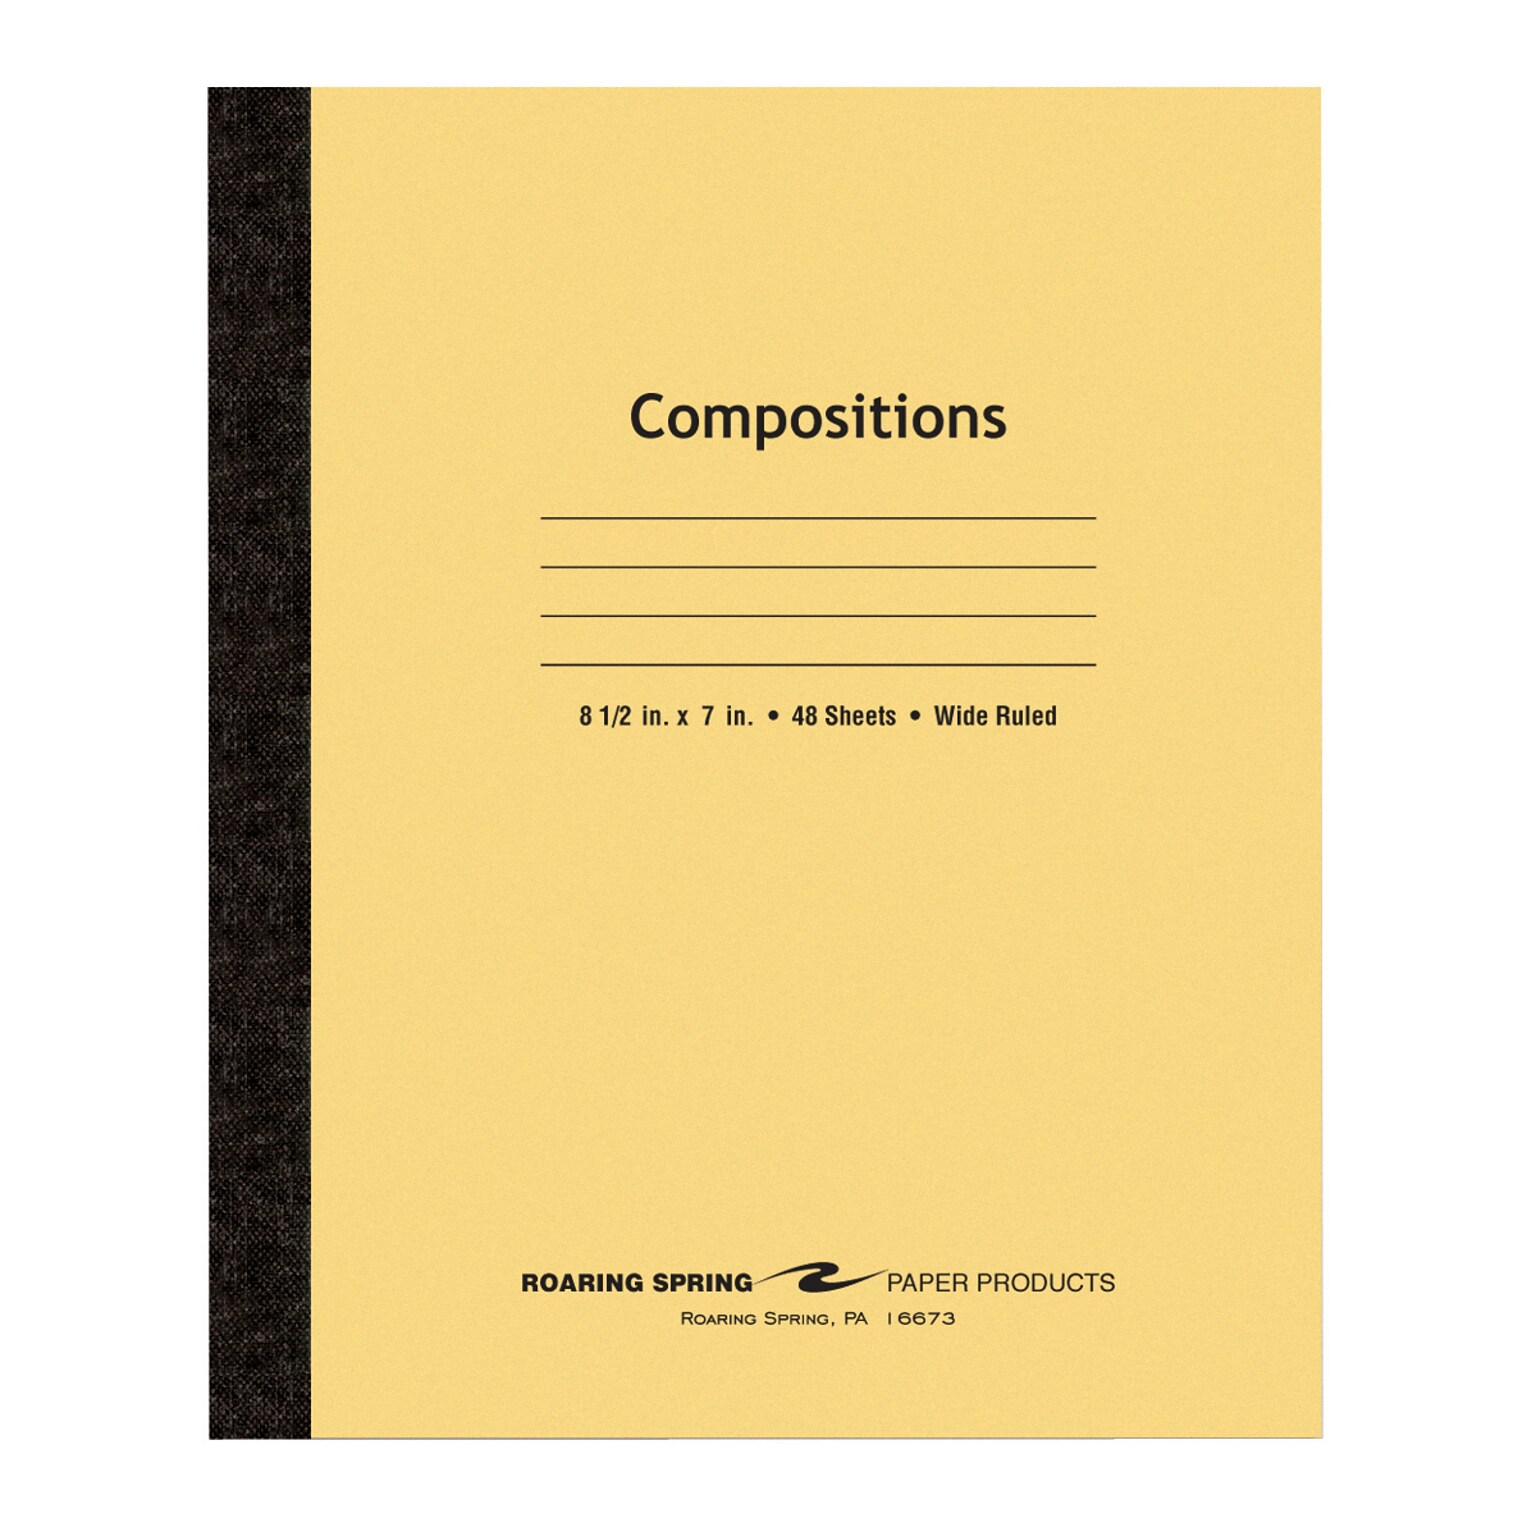 Roaring Spring Paper Products 1-Subject Composition Notebooks, 7 x 8.5, Wide Ruled, 48 Sheets, Brown (77308)